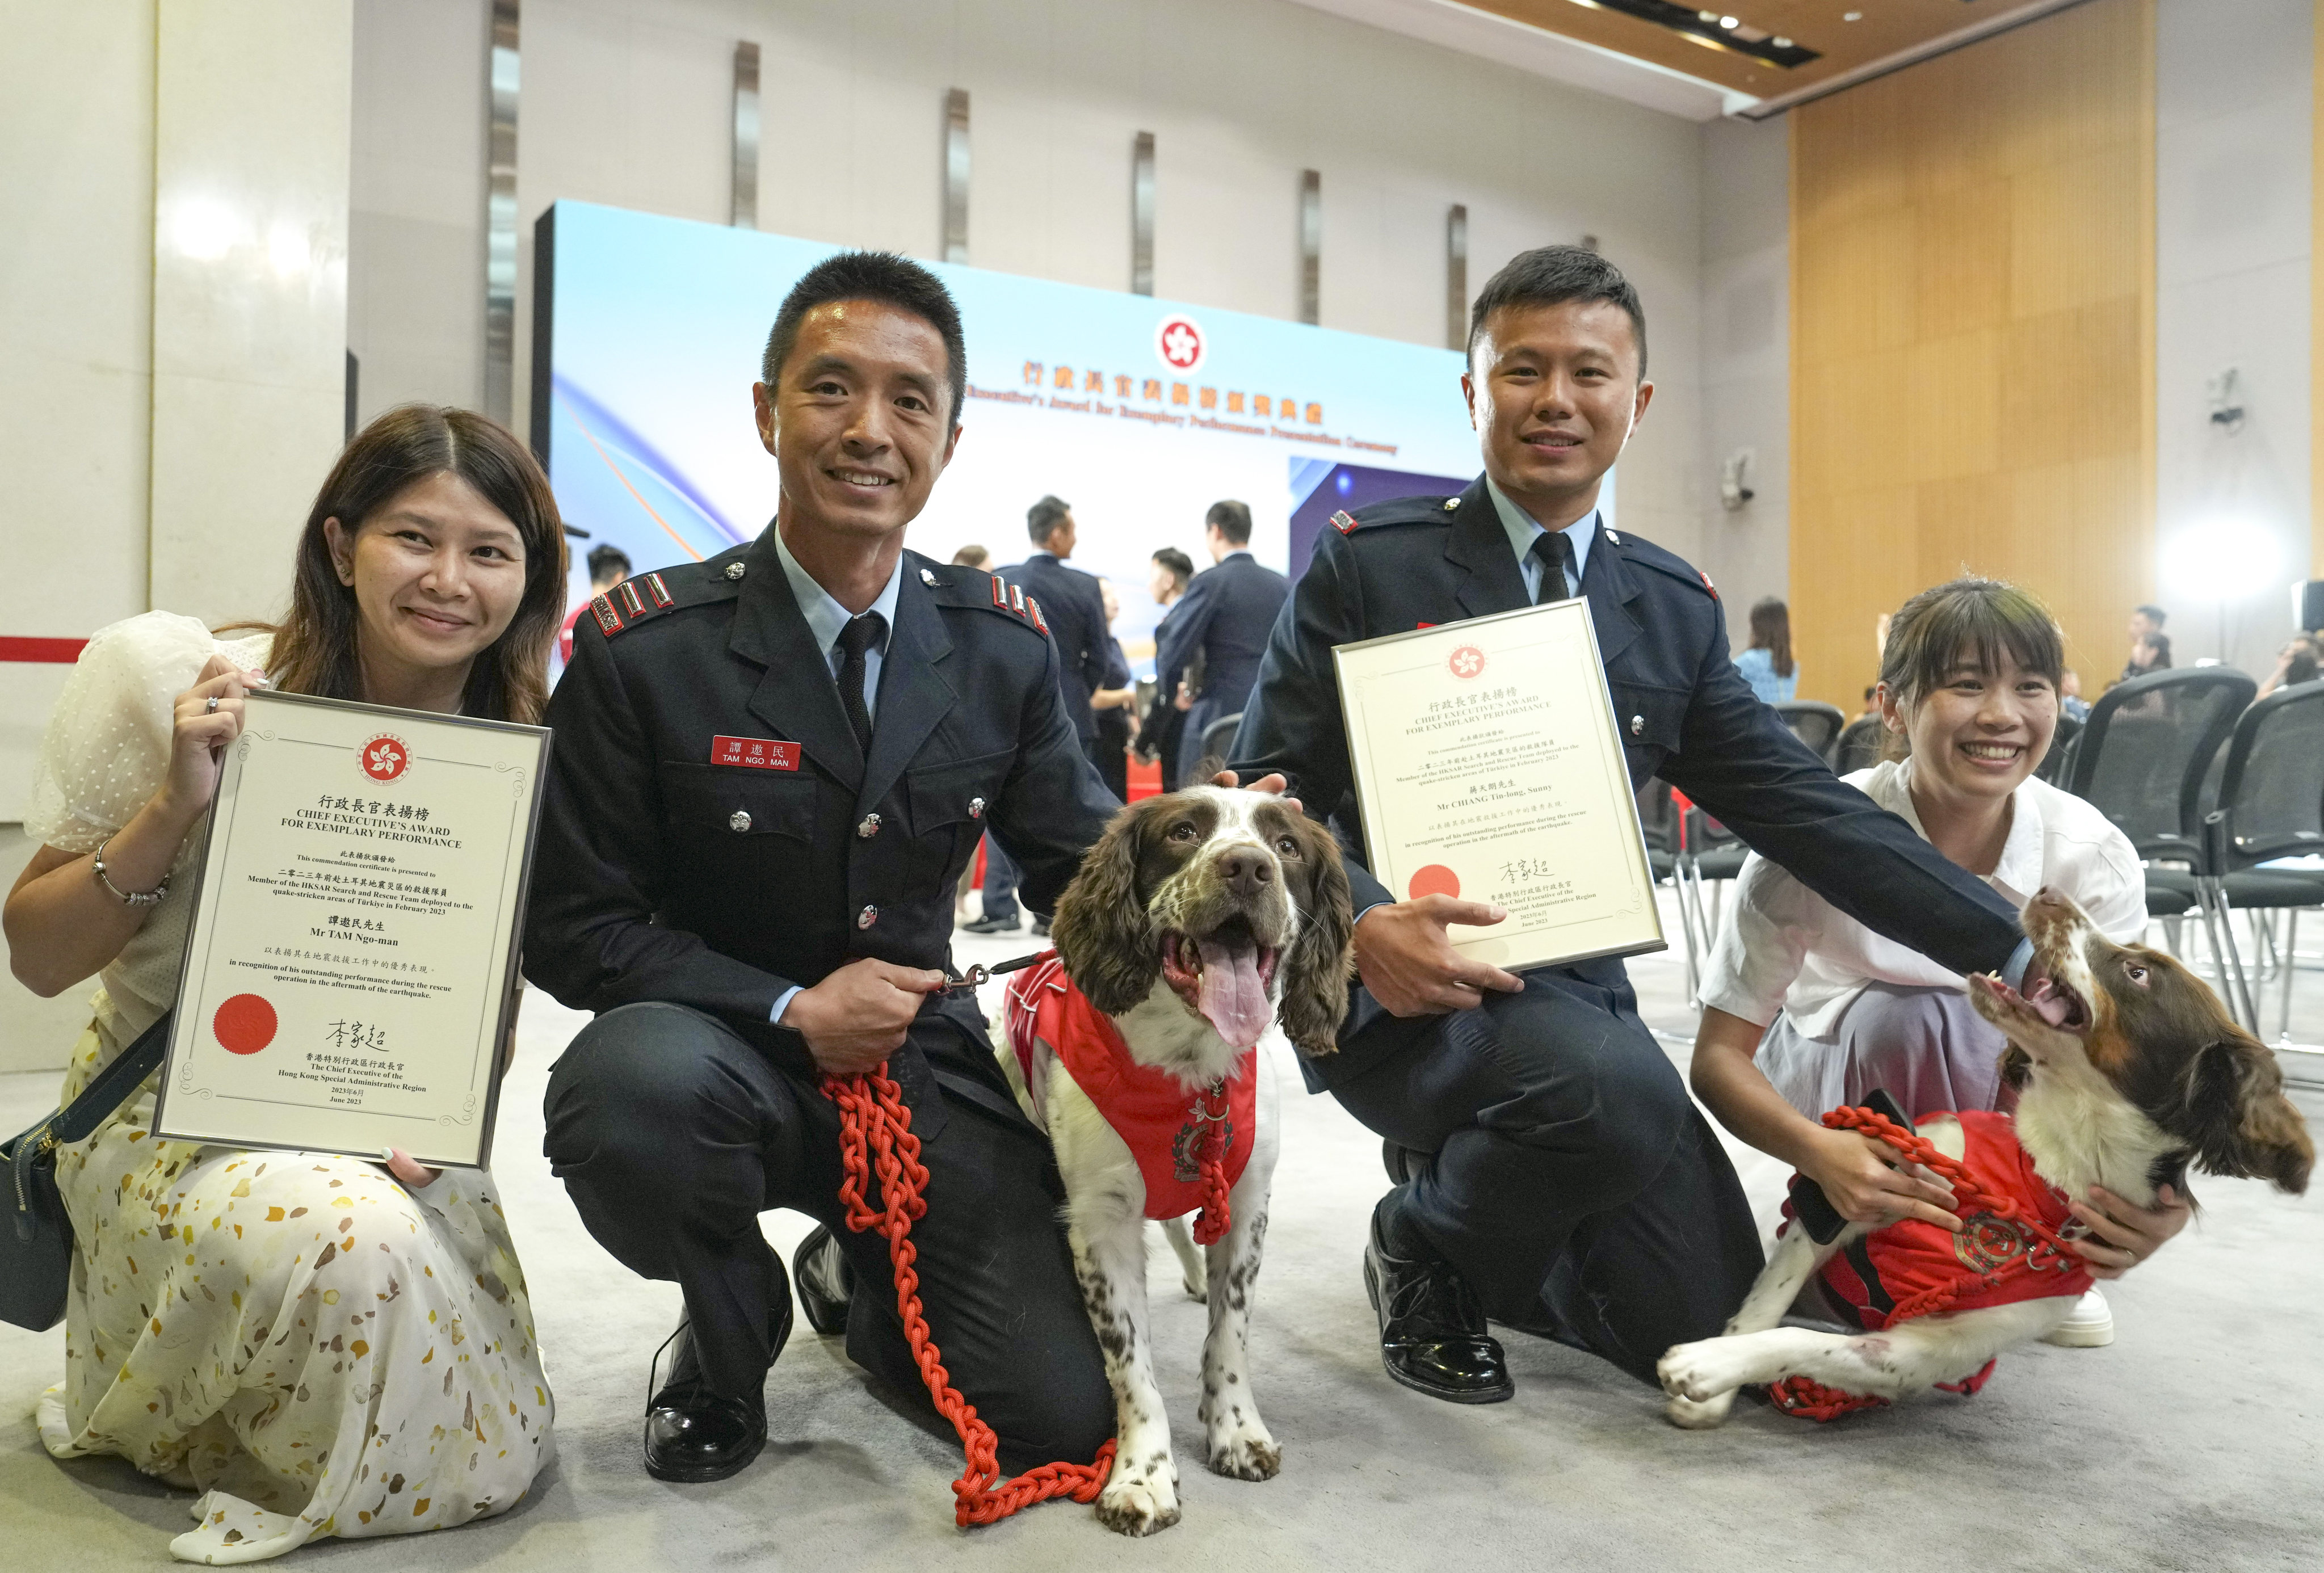 Firefighters Tam Ngo-man (second left) and Chiang Tin-long with rescue dogs Umi and Twix and proud members of their families after a Hong Kong team was given the Chief Executive’s Award for Exemplary Performance for their mercy mission to earthquake-stricken Turkey.
Photo: Elson Li